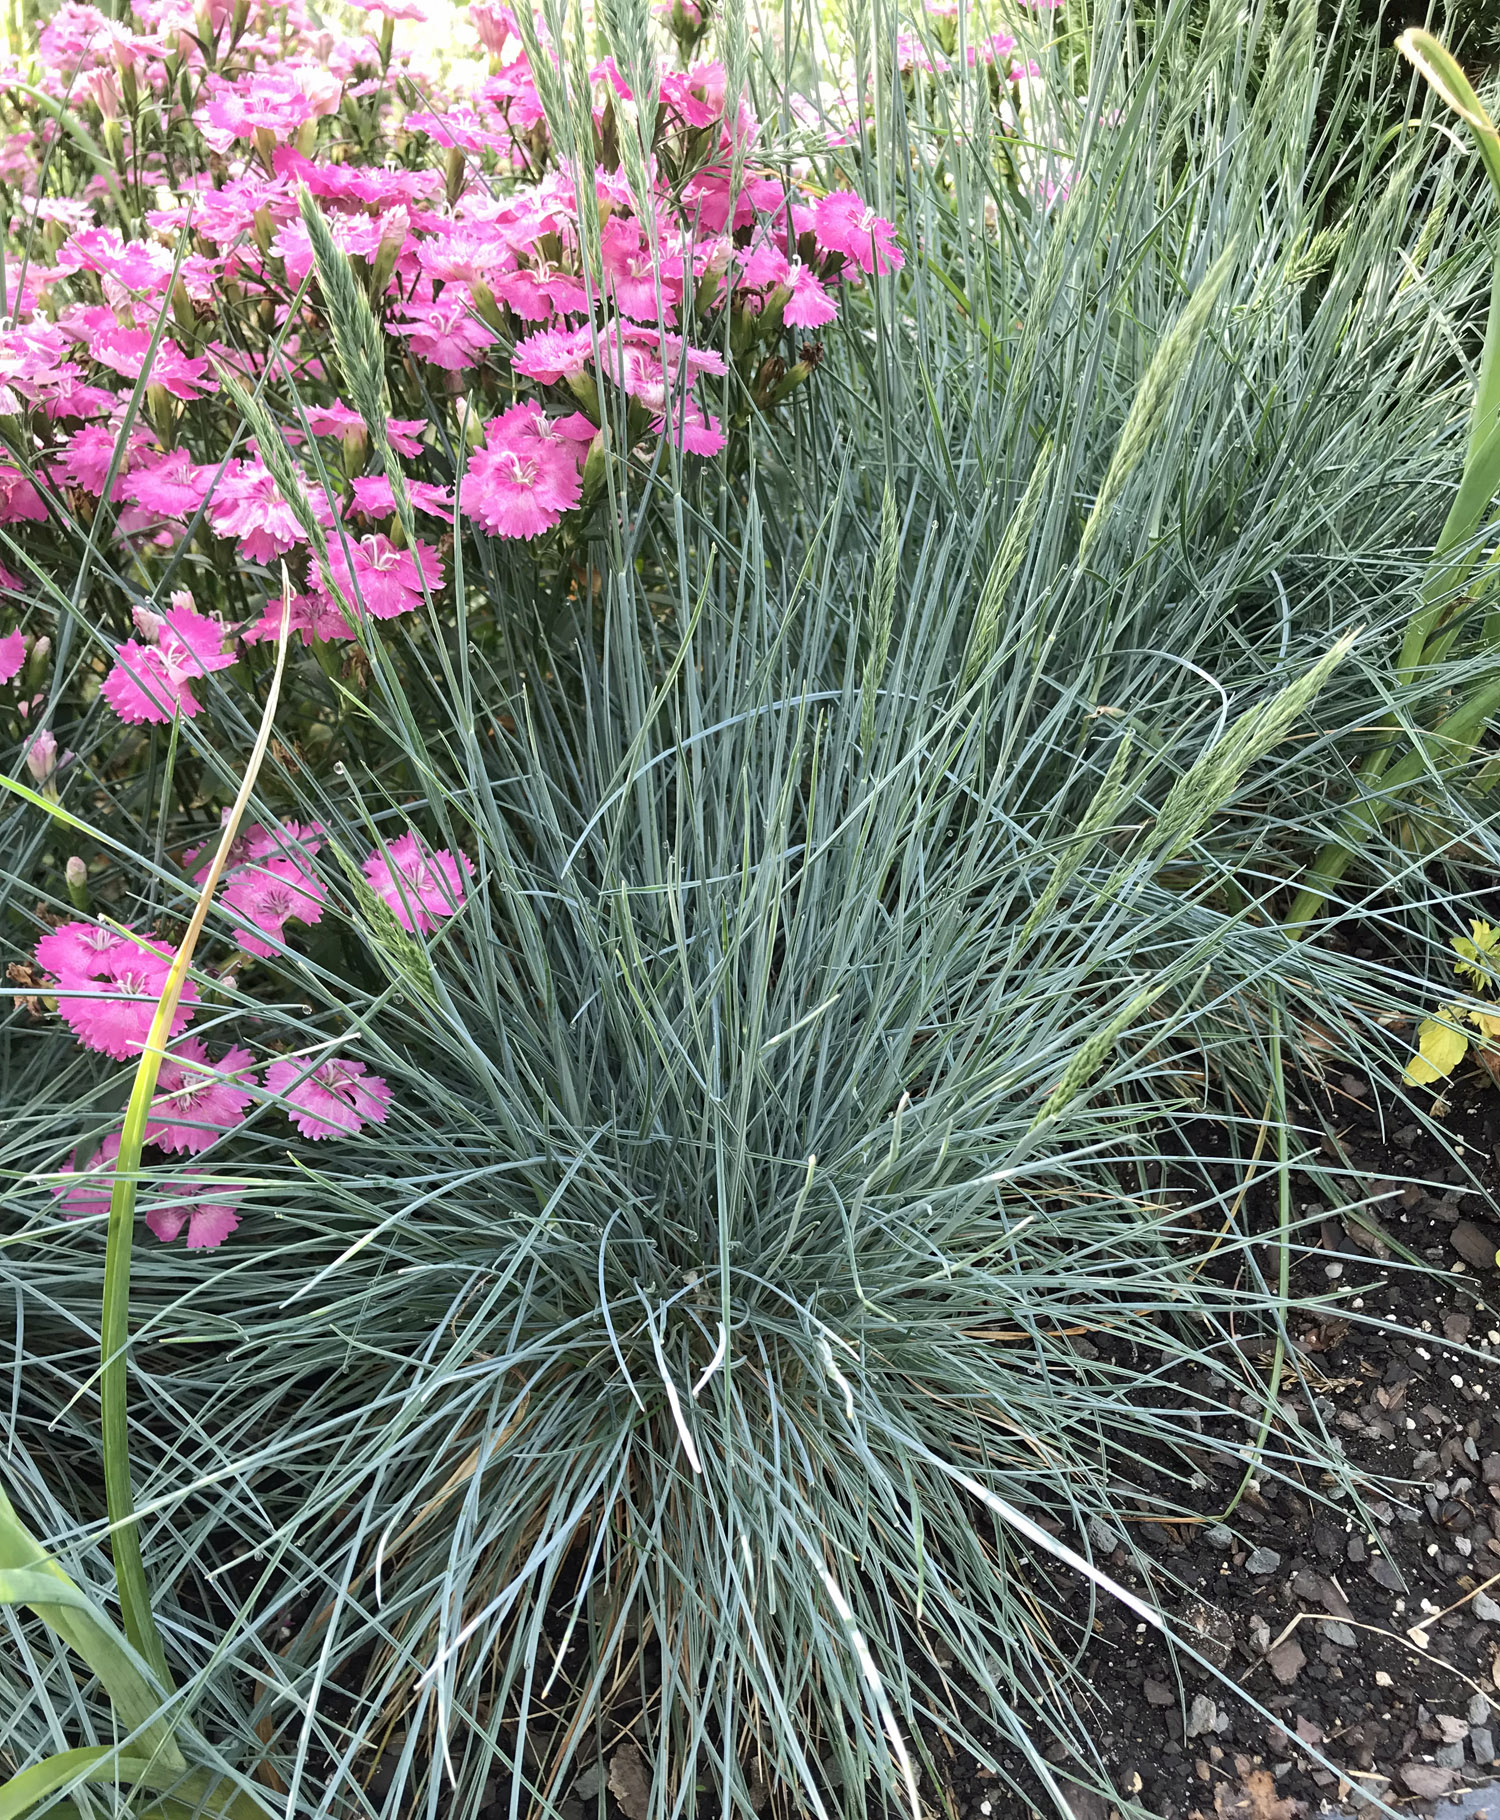 Beyond Blue Fescue adds a bright pop of color.